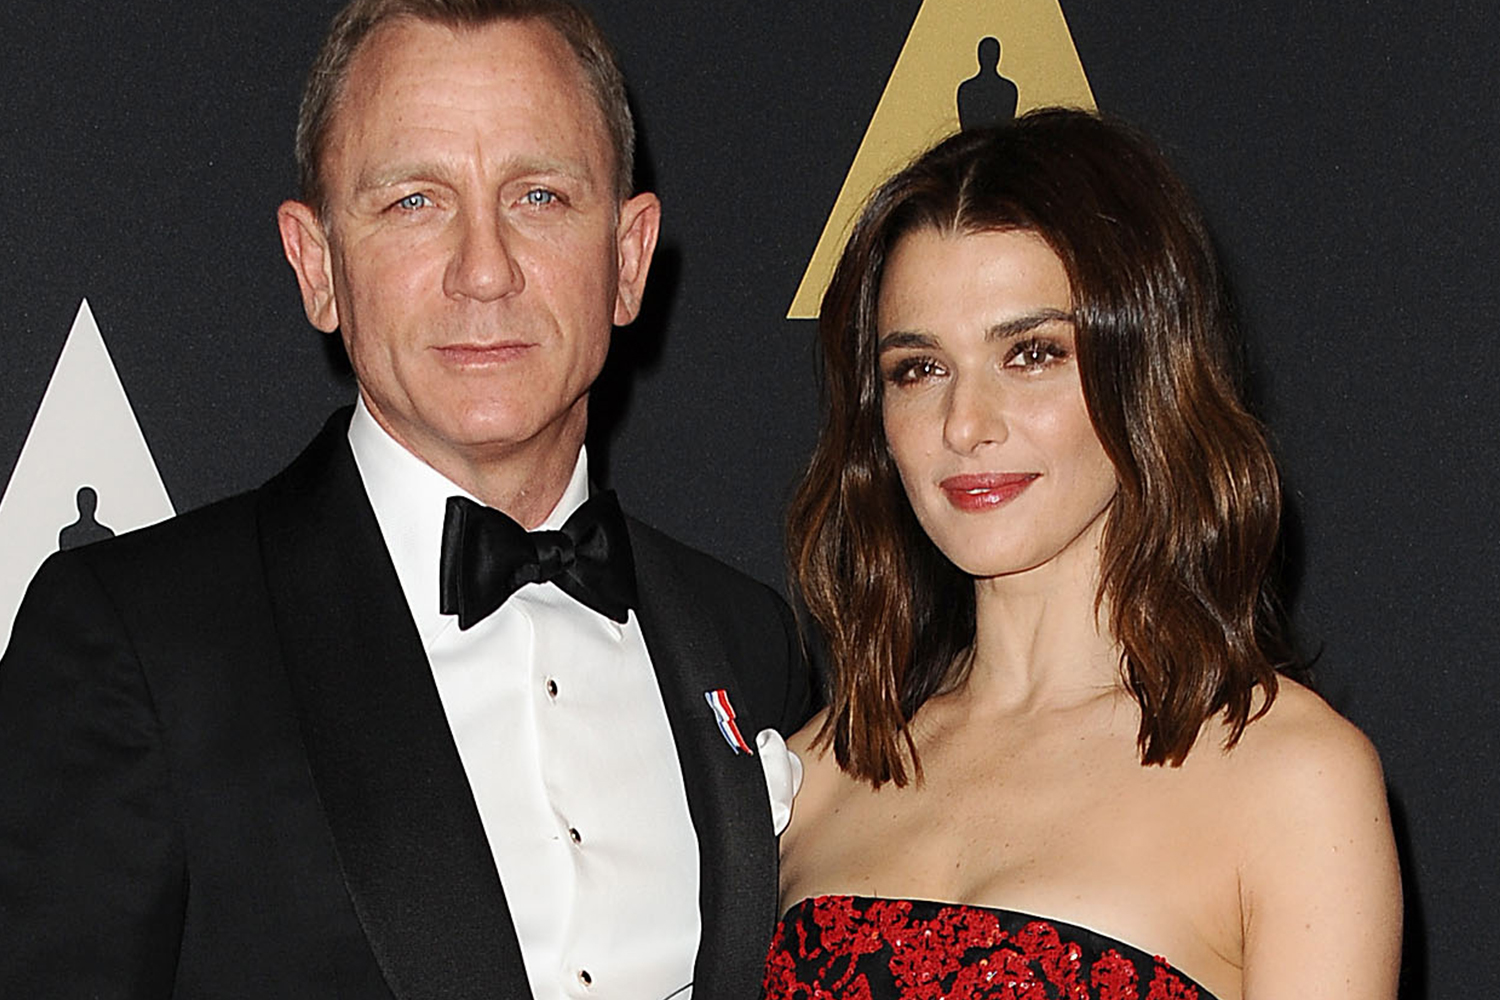 Rachel Weisz And Daniel Craig Are Expecting Their First Child Together